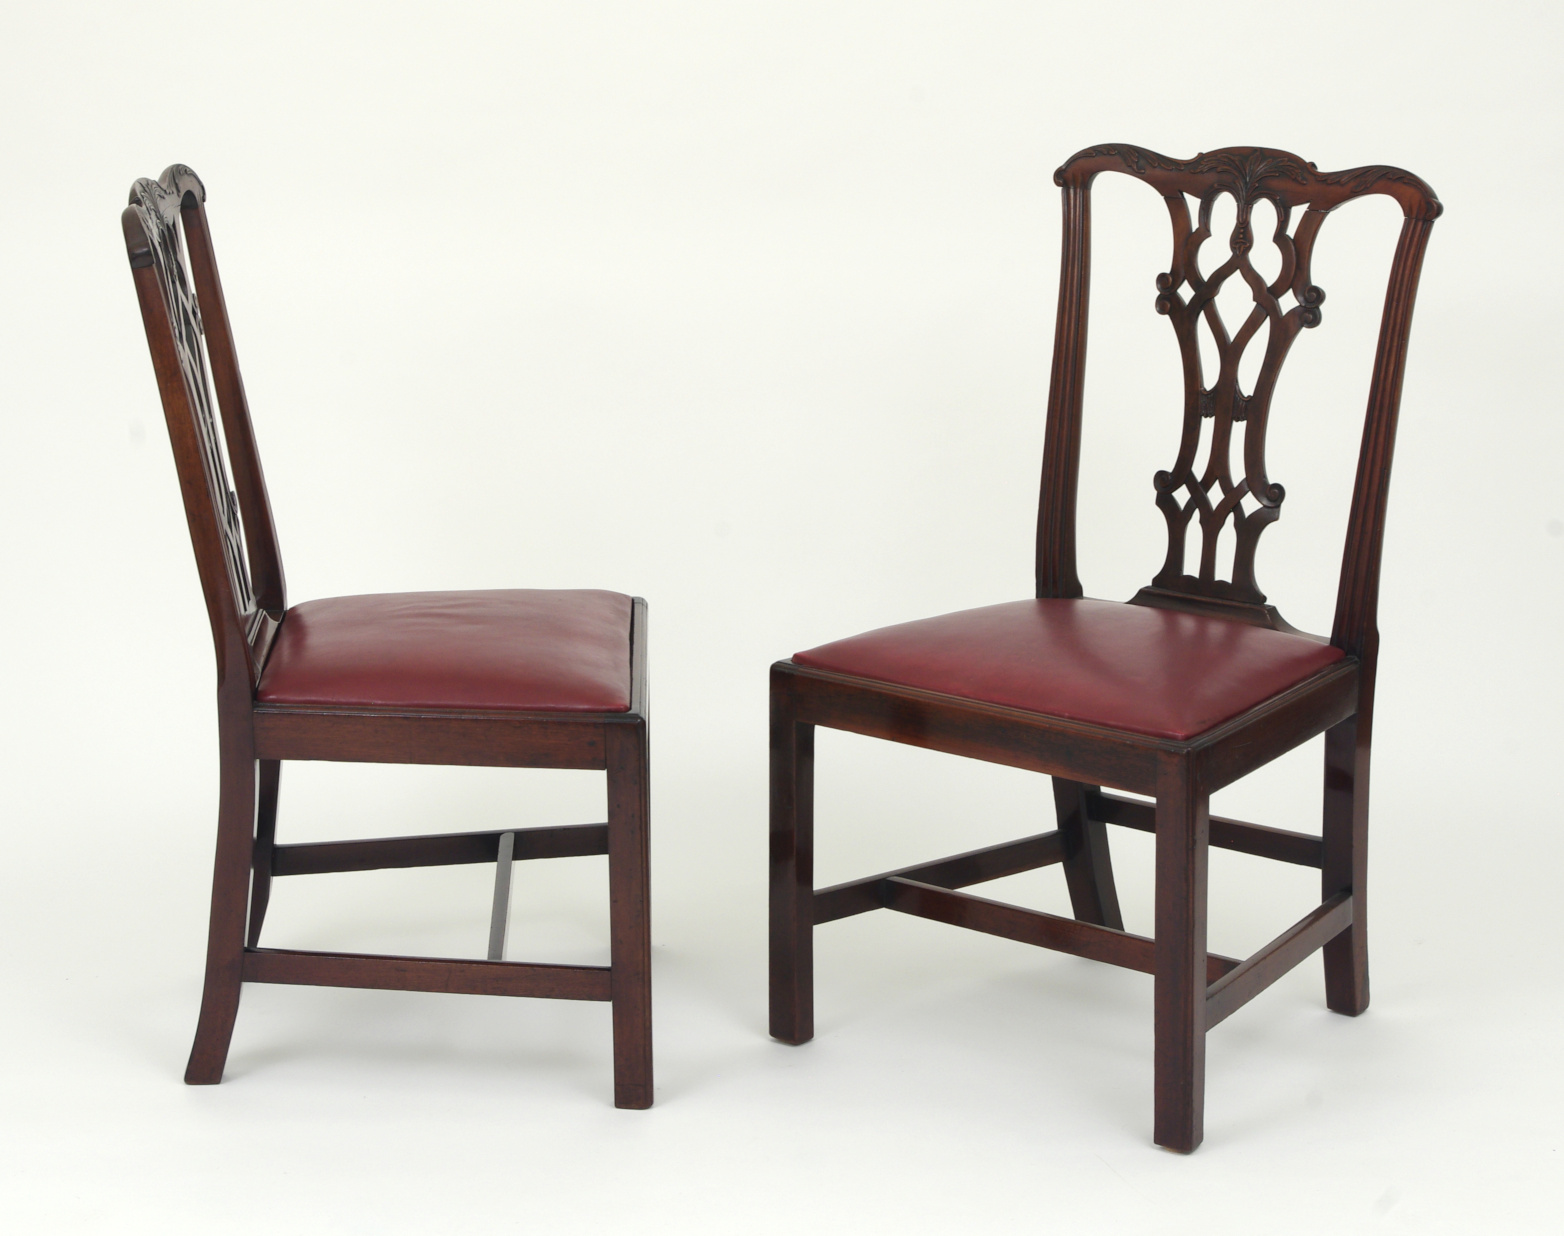 Set of Eight Chippendale Mahogany Dining Chairs (6+2), early 19th c.